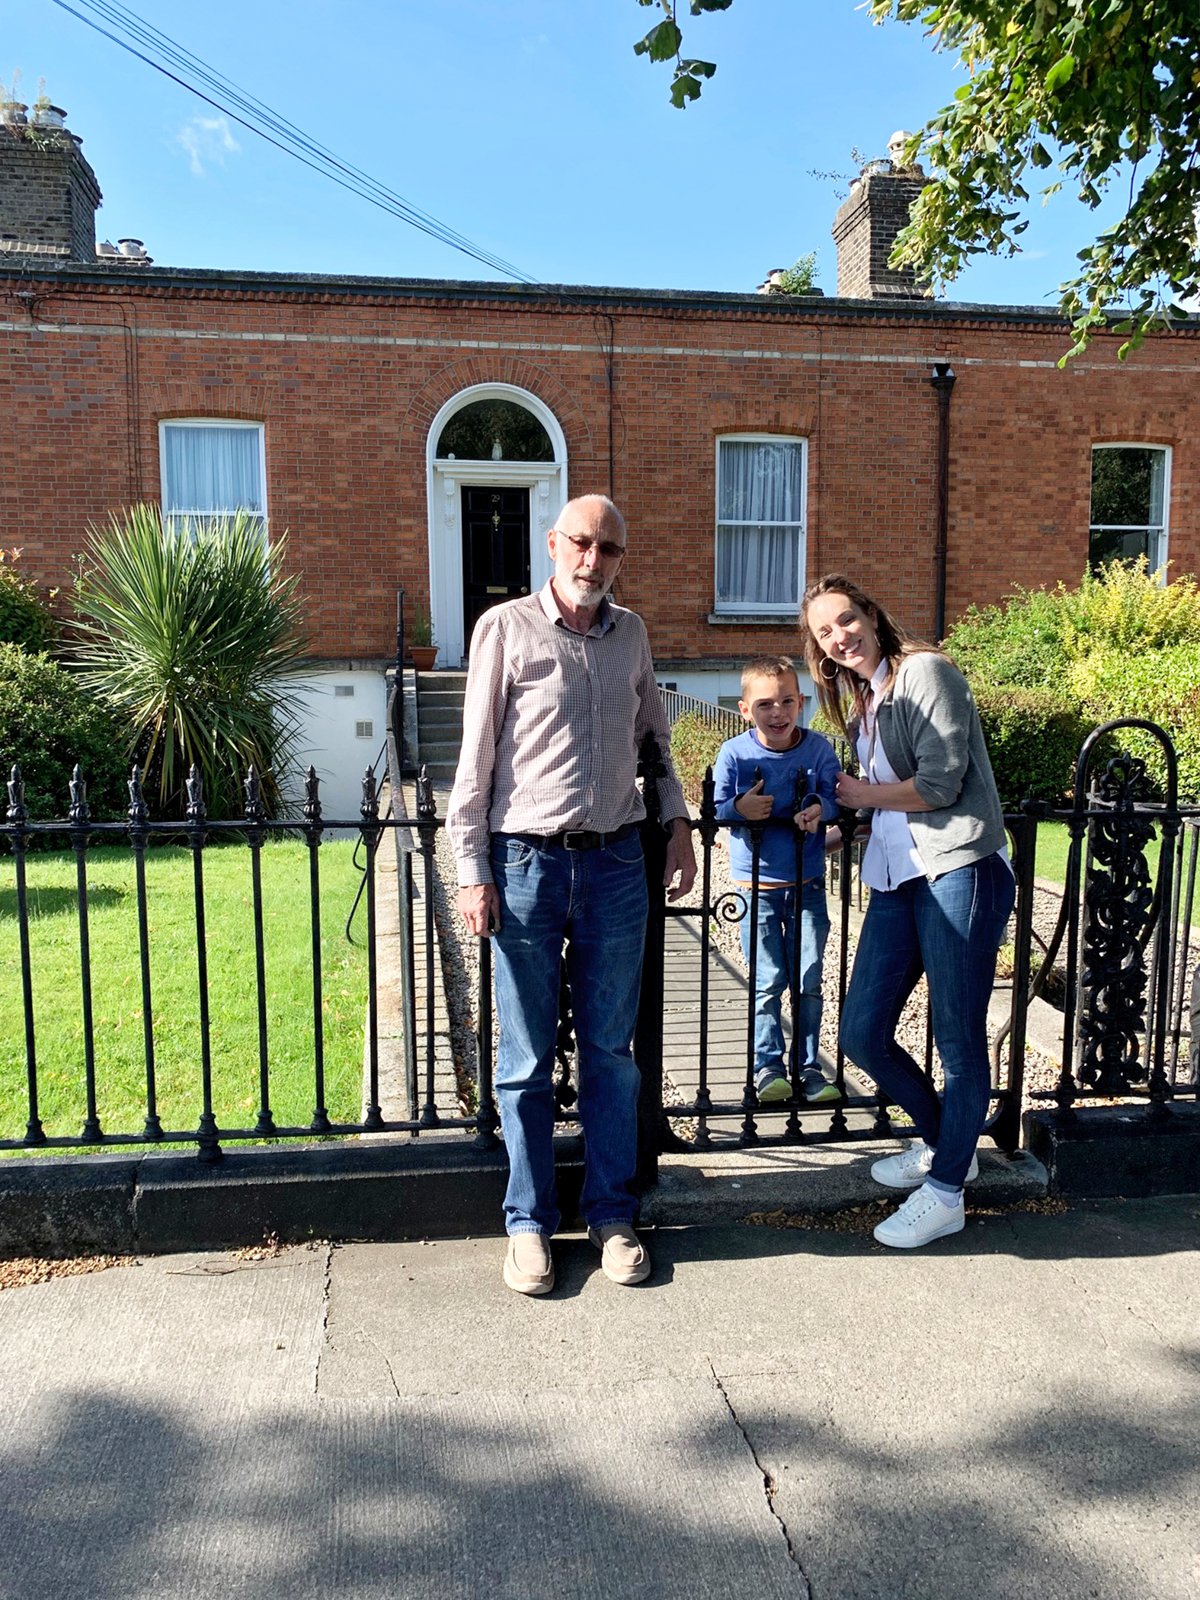 Brian with daughter Aisling and grandson Liam outside Brian’s family home, Sandymount, Dublin, October 2019.